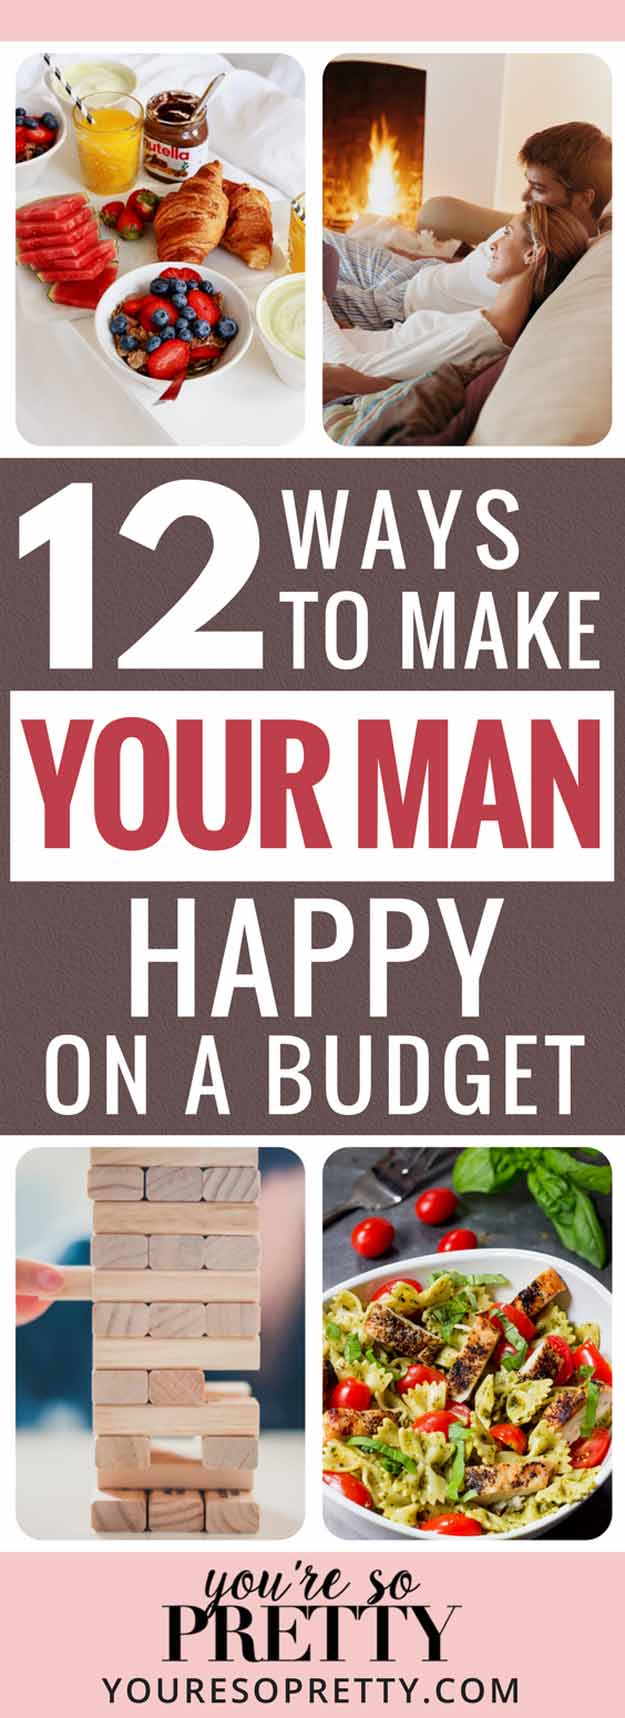 12 Ways to Make Your Man Happy Without Spending This Valentine's Day